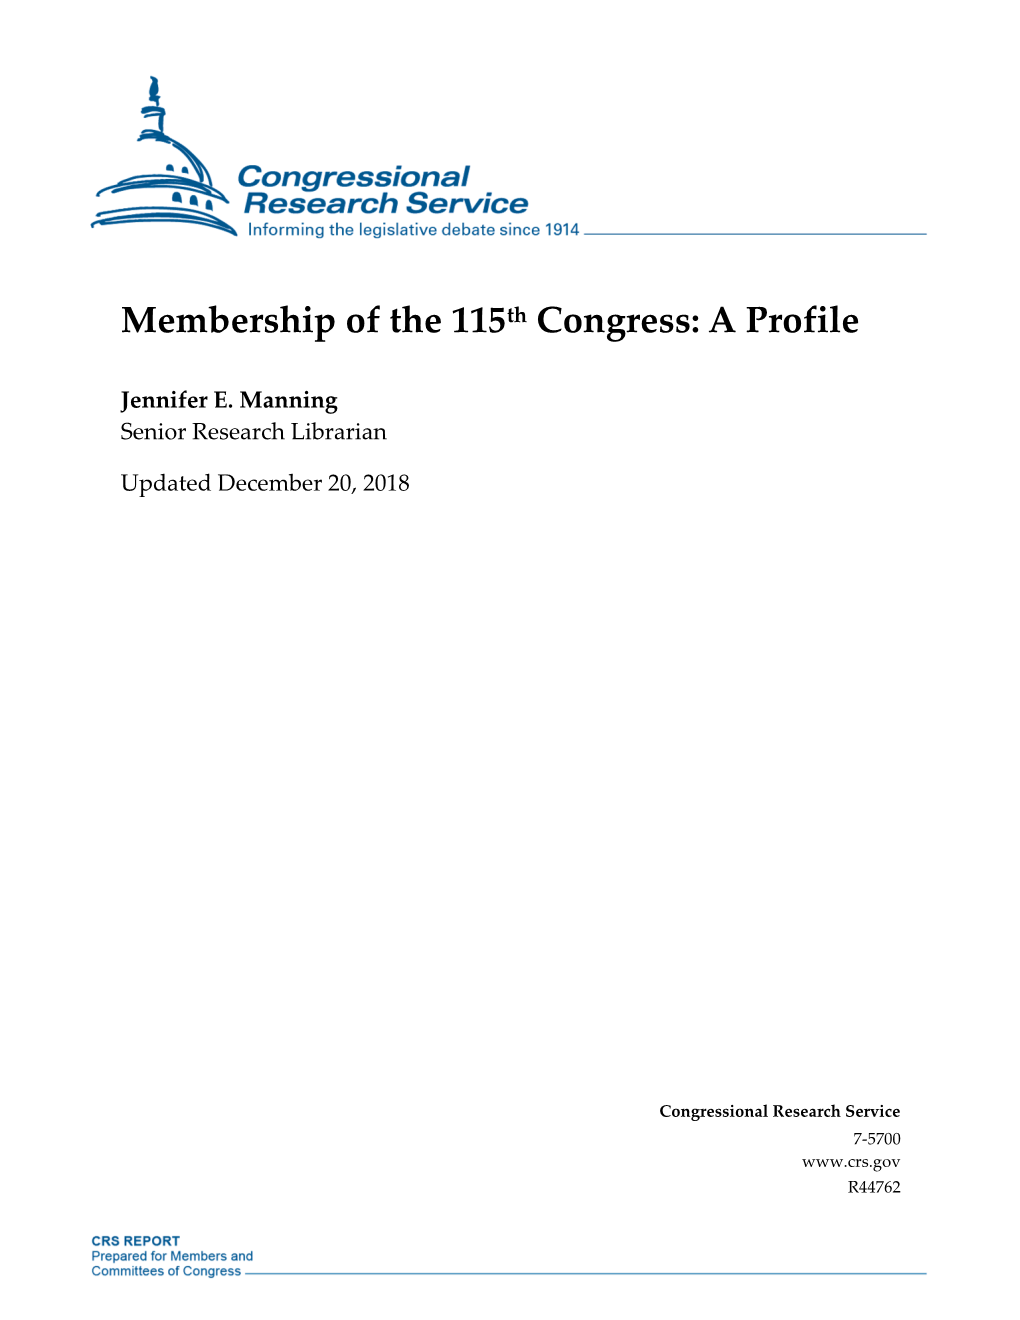 Membership of the 115Th Congress: a Profile